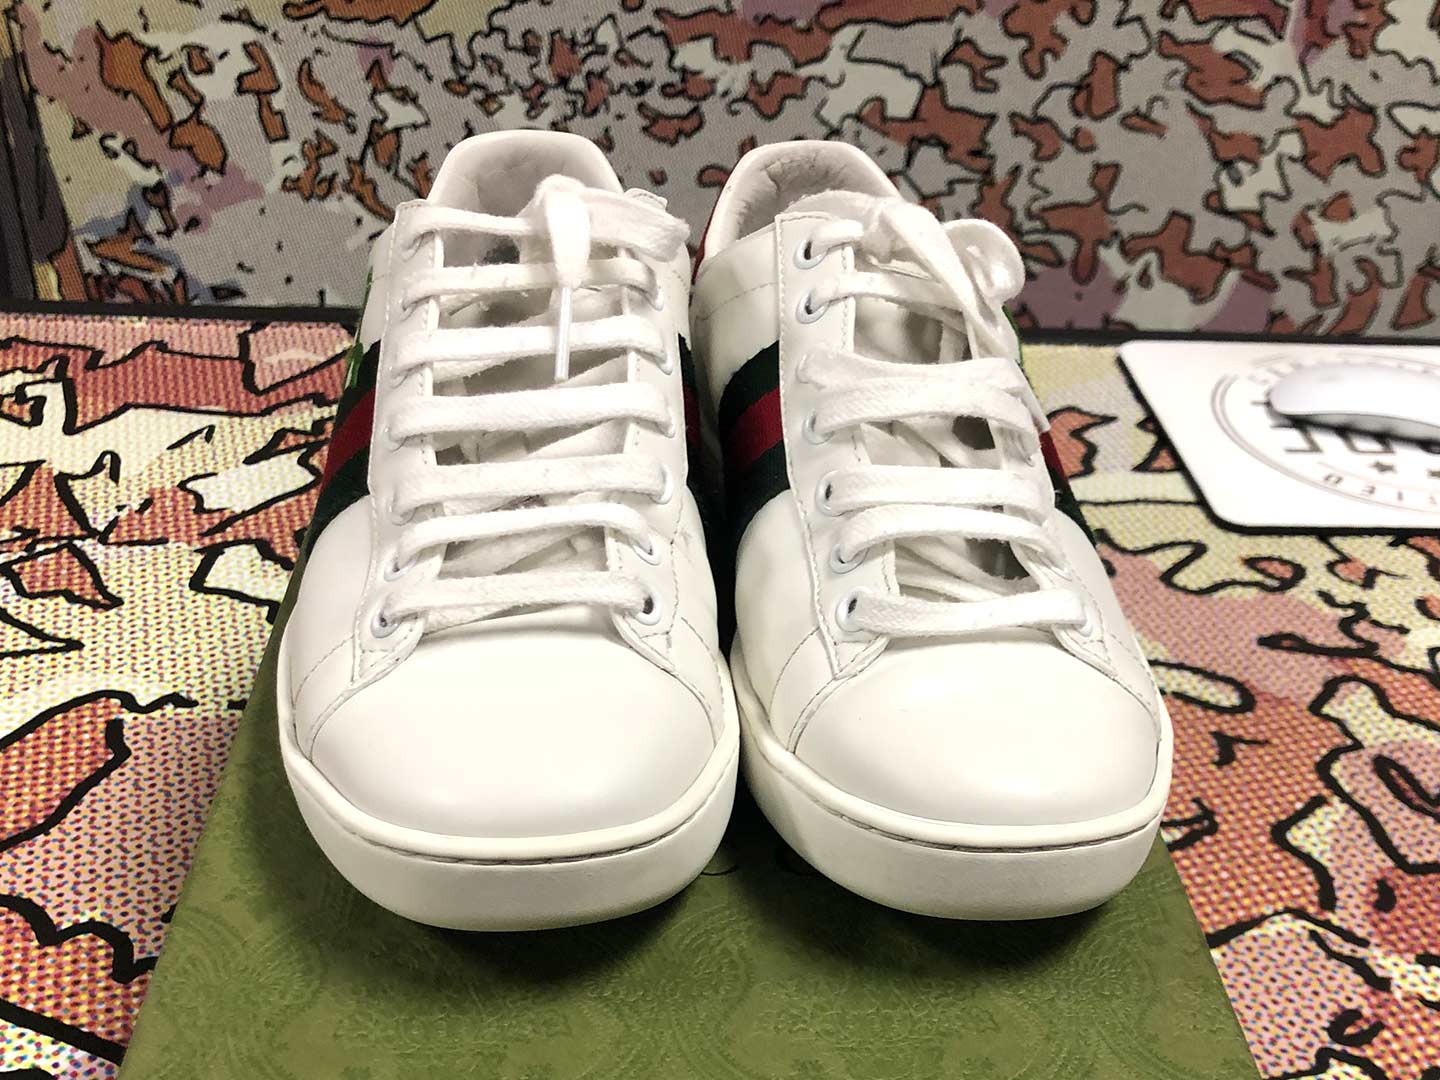 Gucci Ace Women's Sneaker with Cherry Before Cleaning Toes